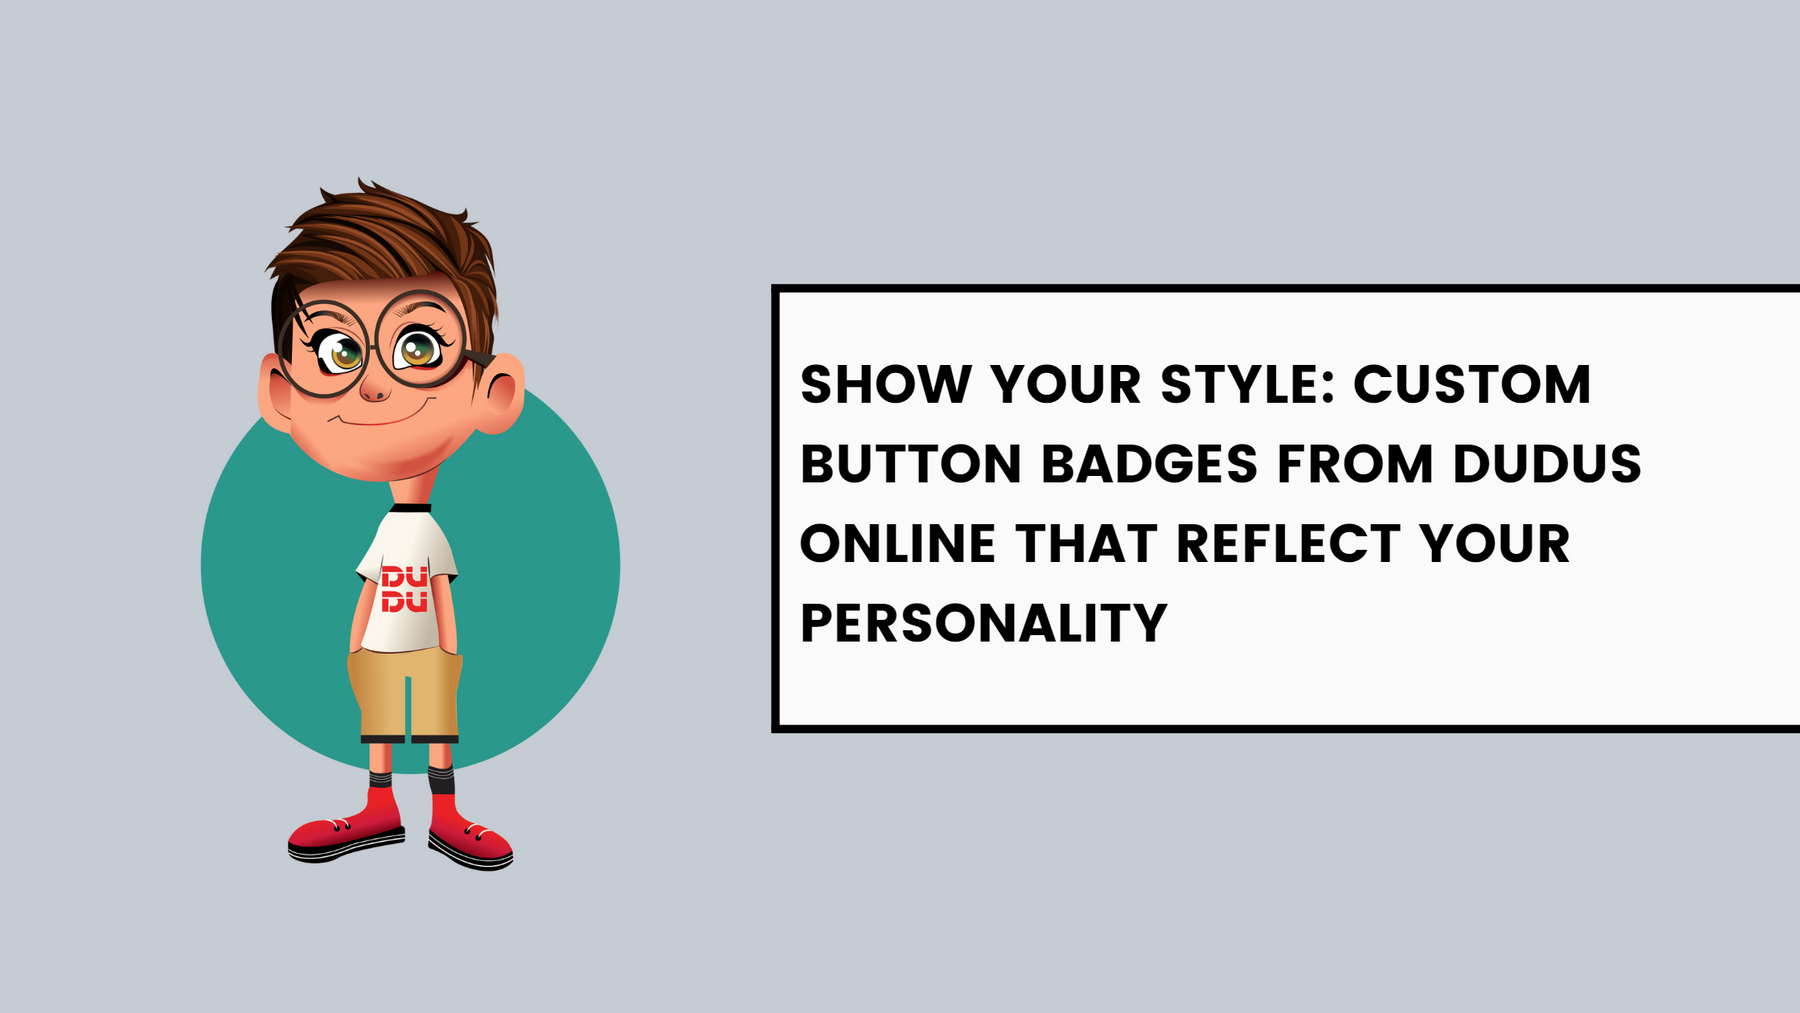 Show Your Style: Custom Button Badges From Dudus Online That Reflect Your Personality